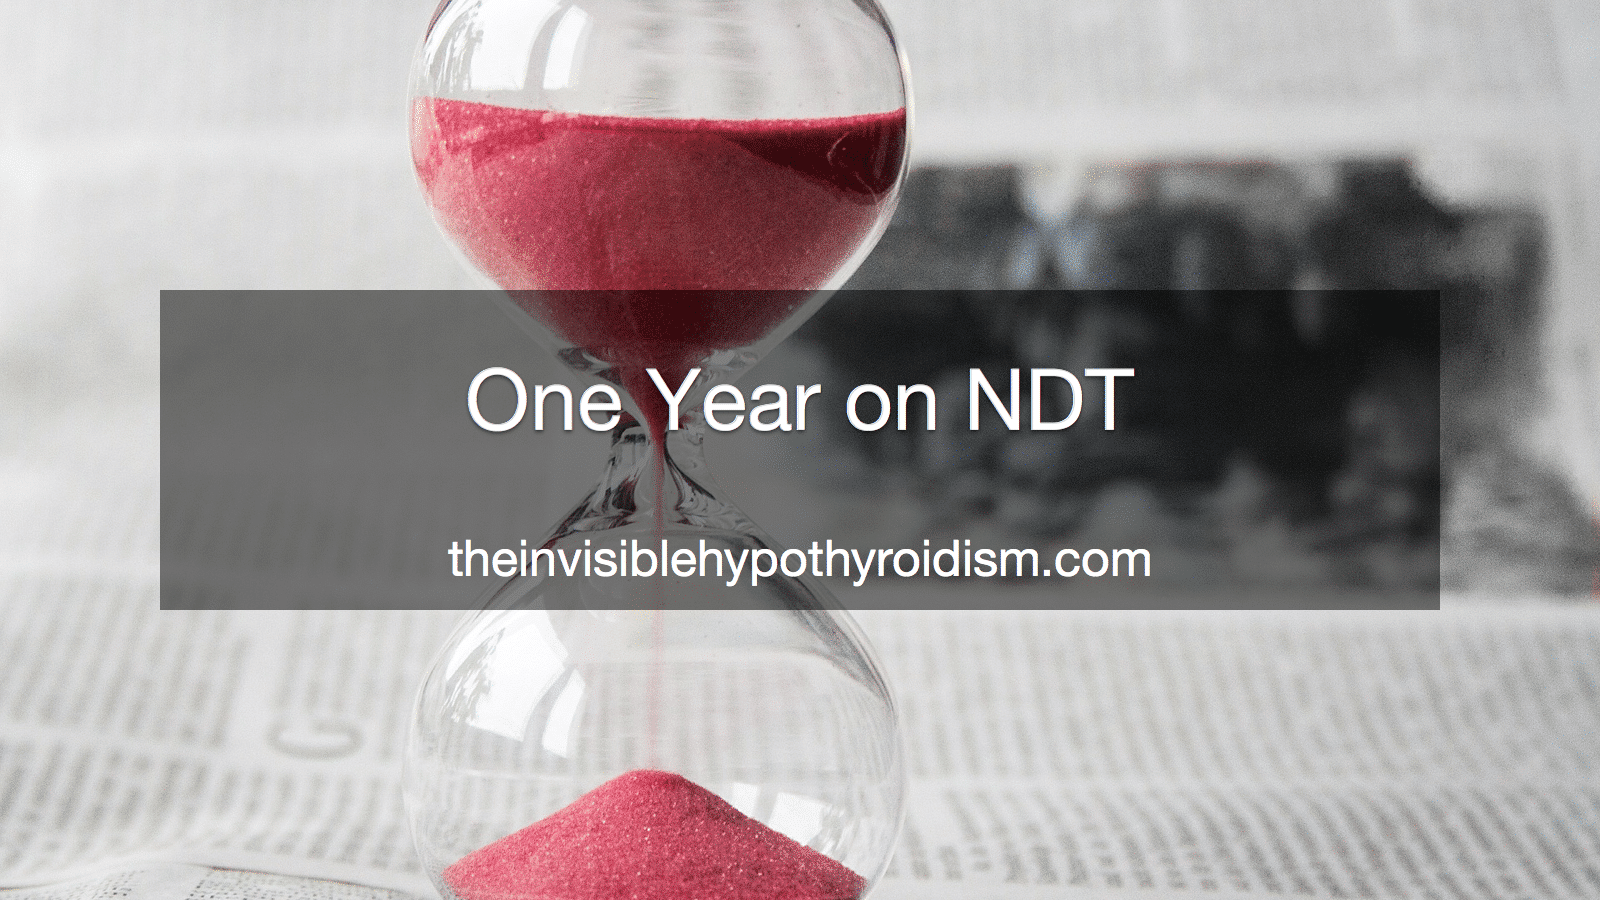 One Year on NDT